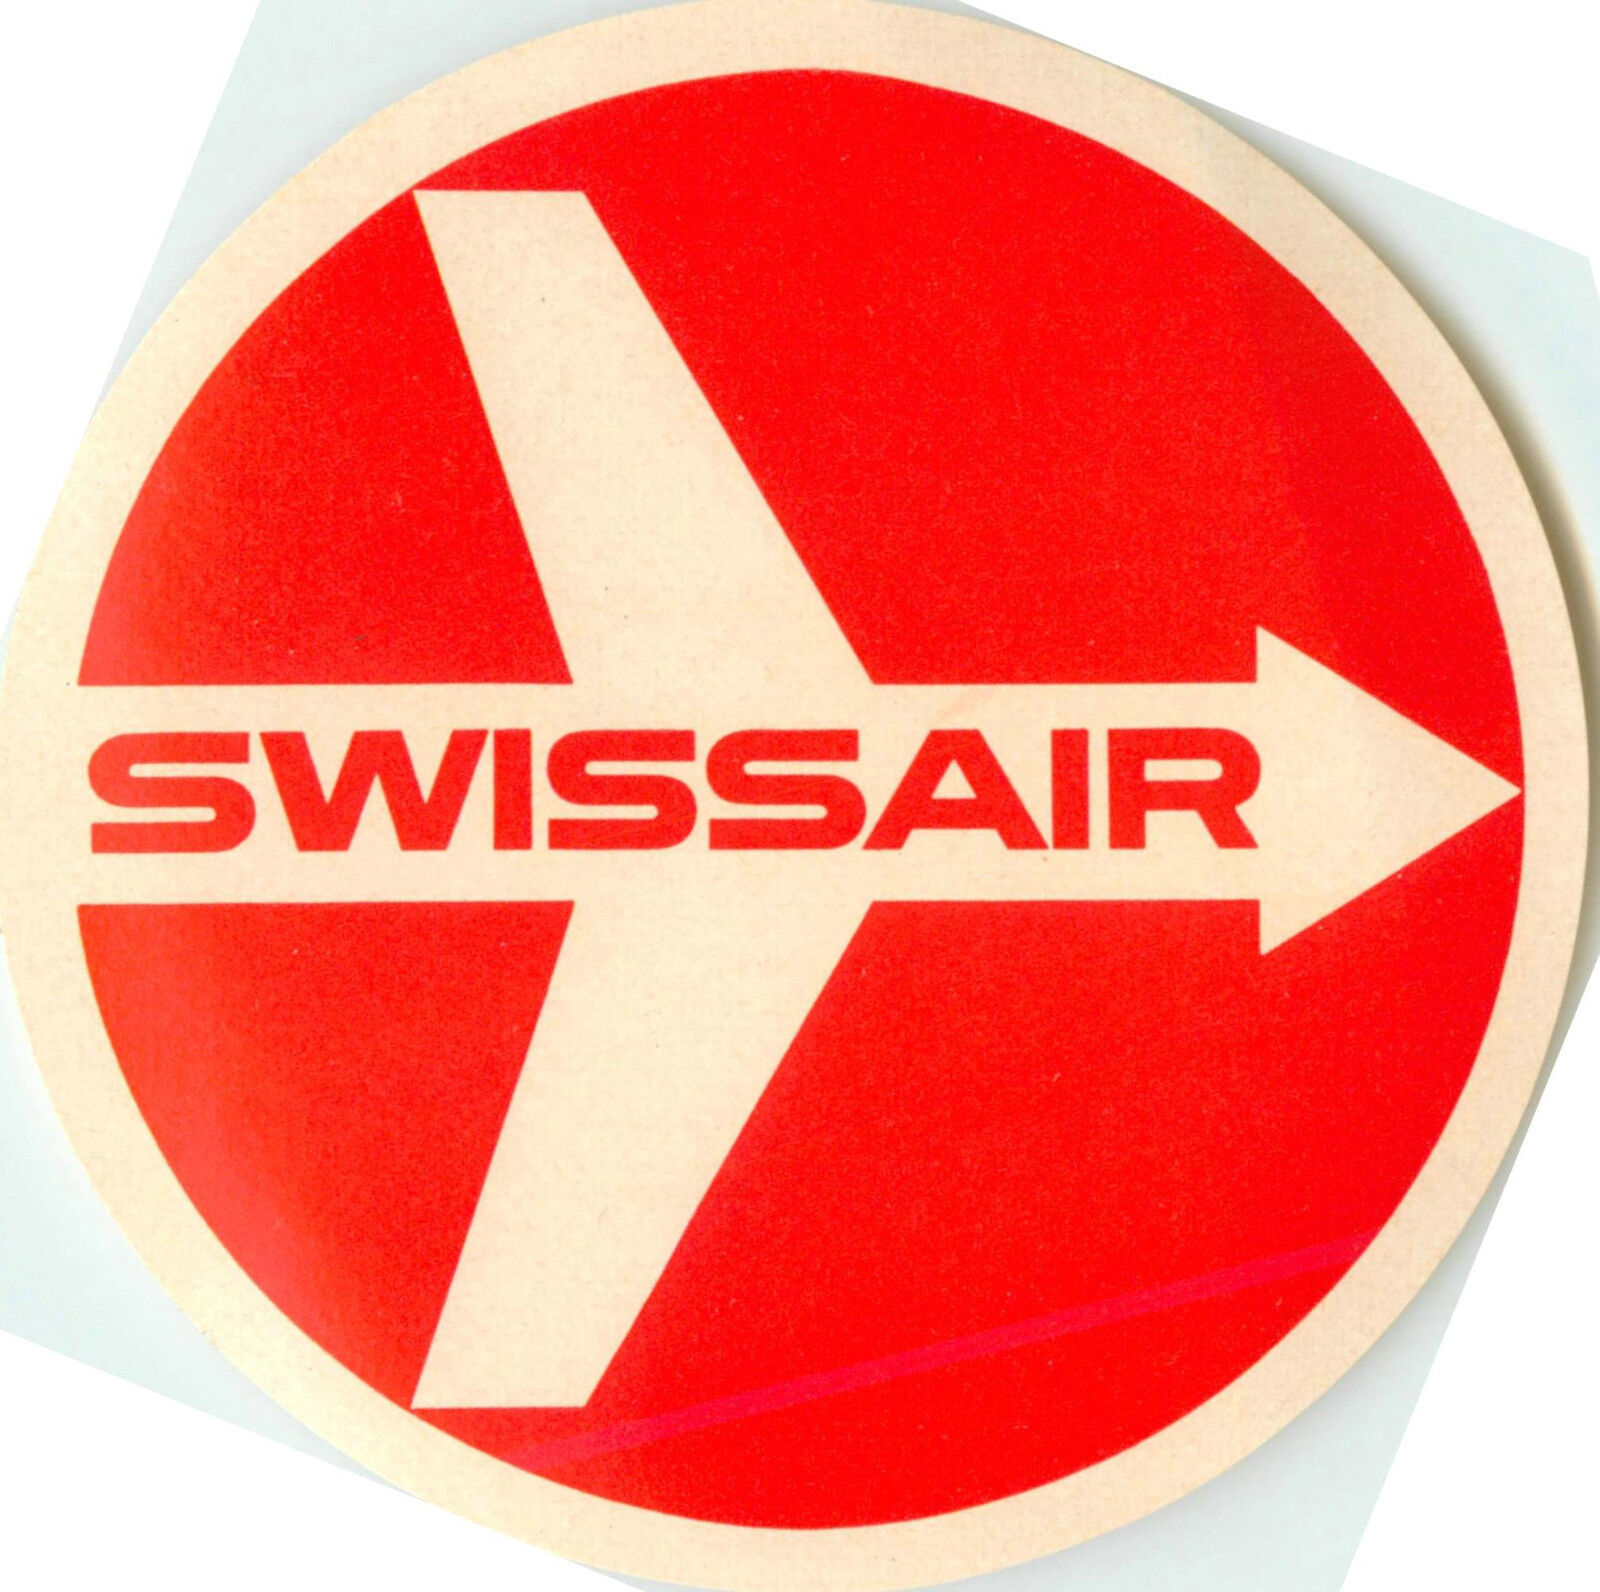 SWISSAIR - Classic Old Airline Luggage Label with Original Logo, c. 1955  MINT